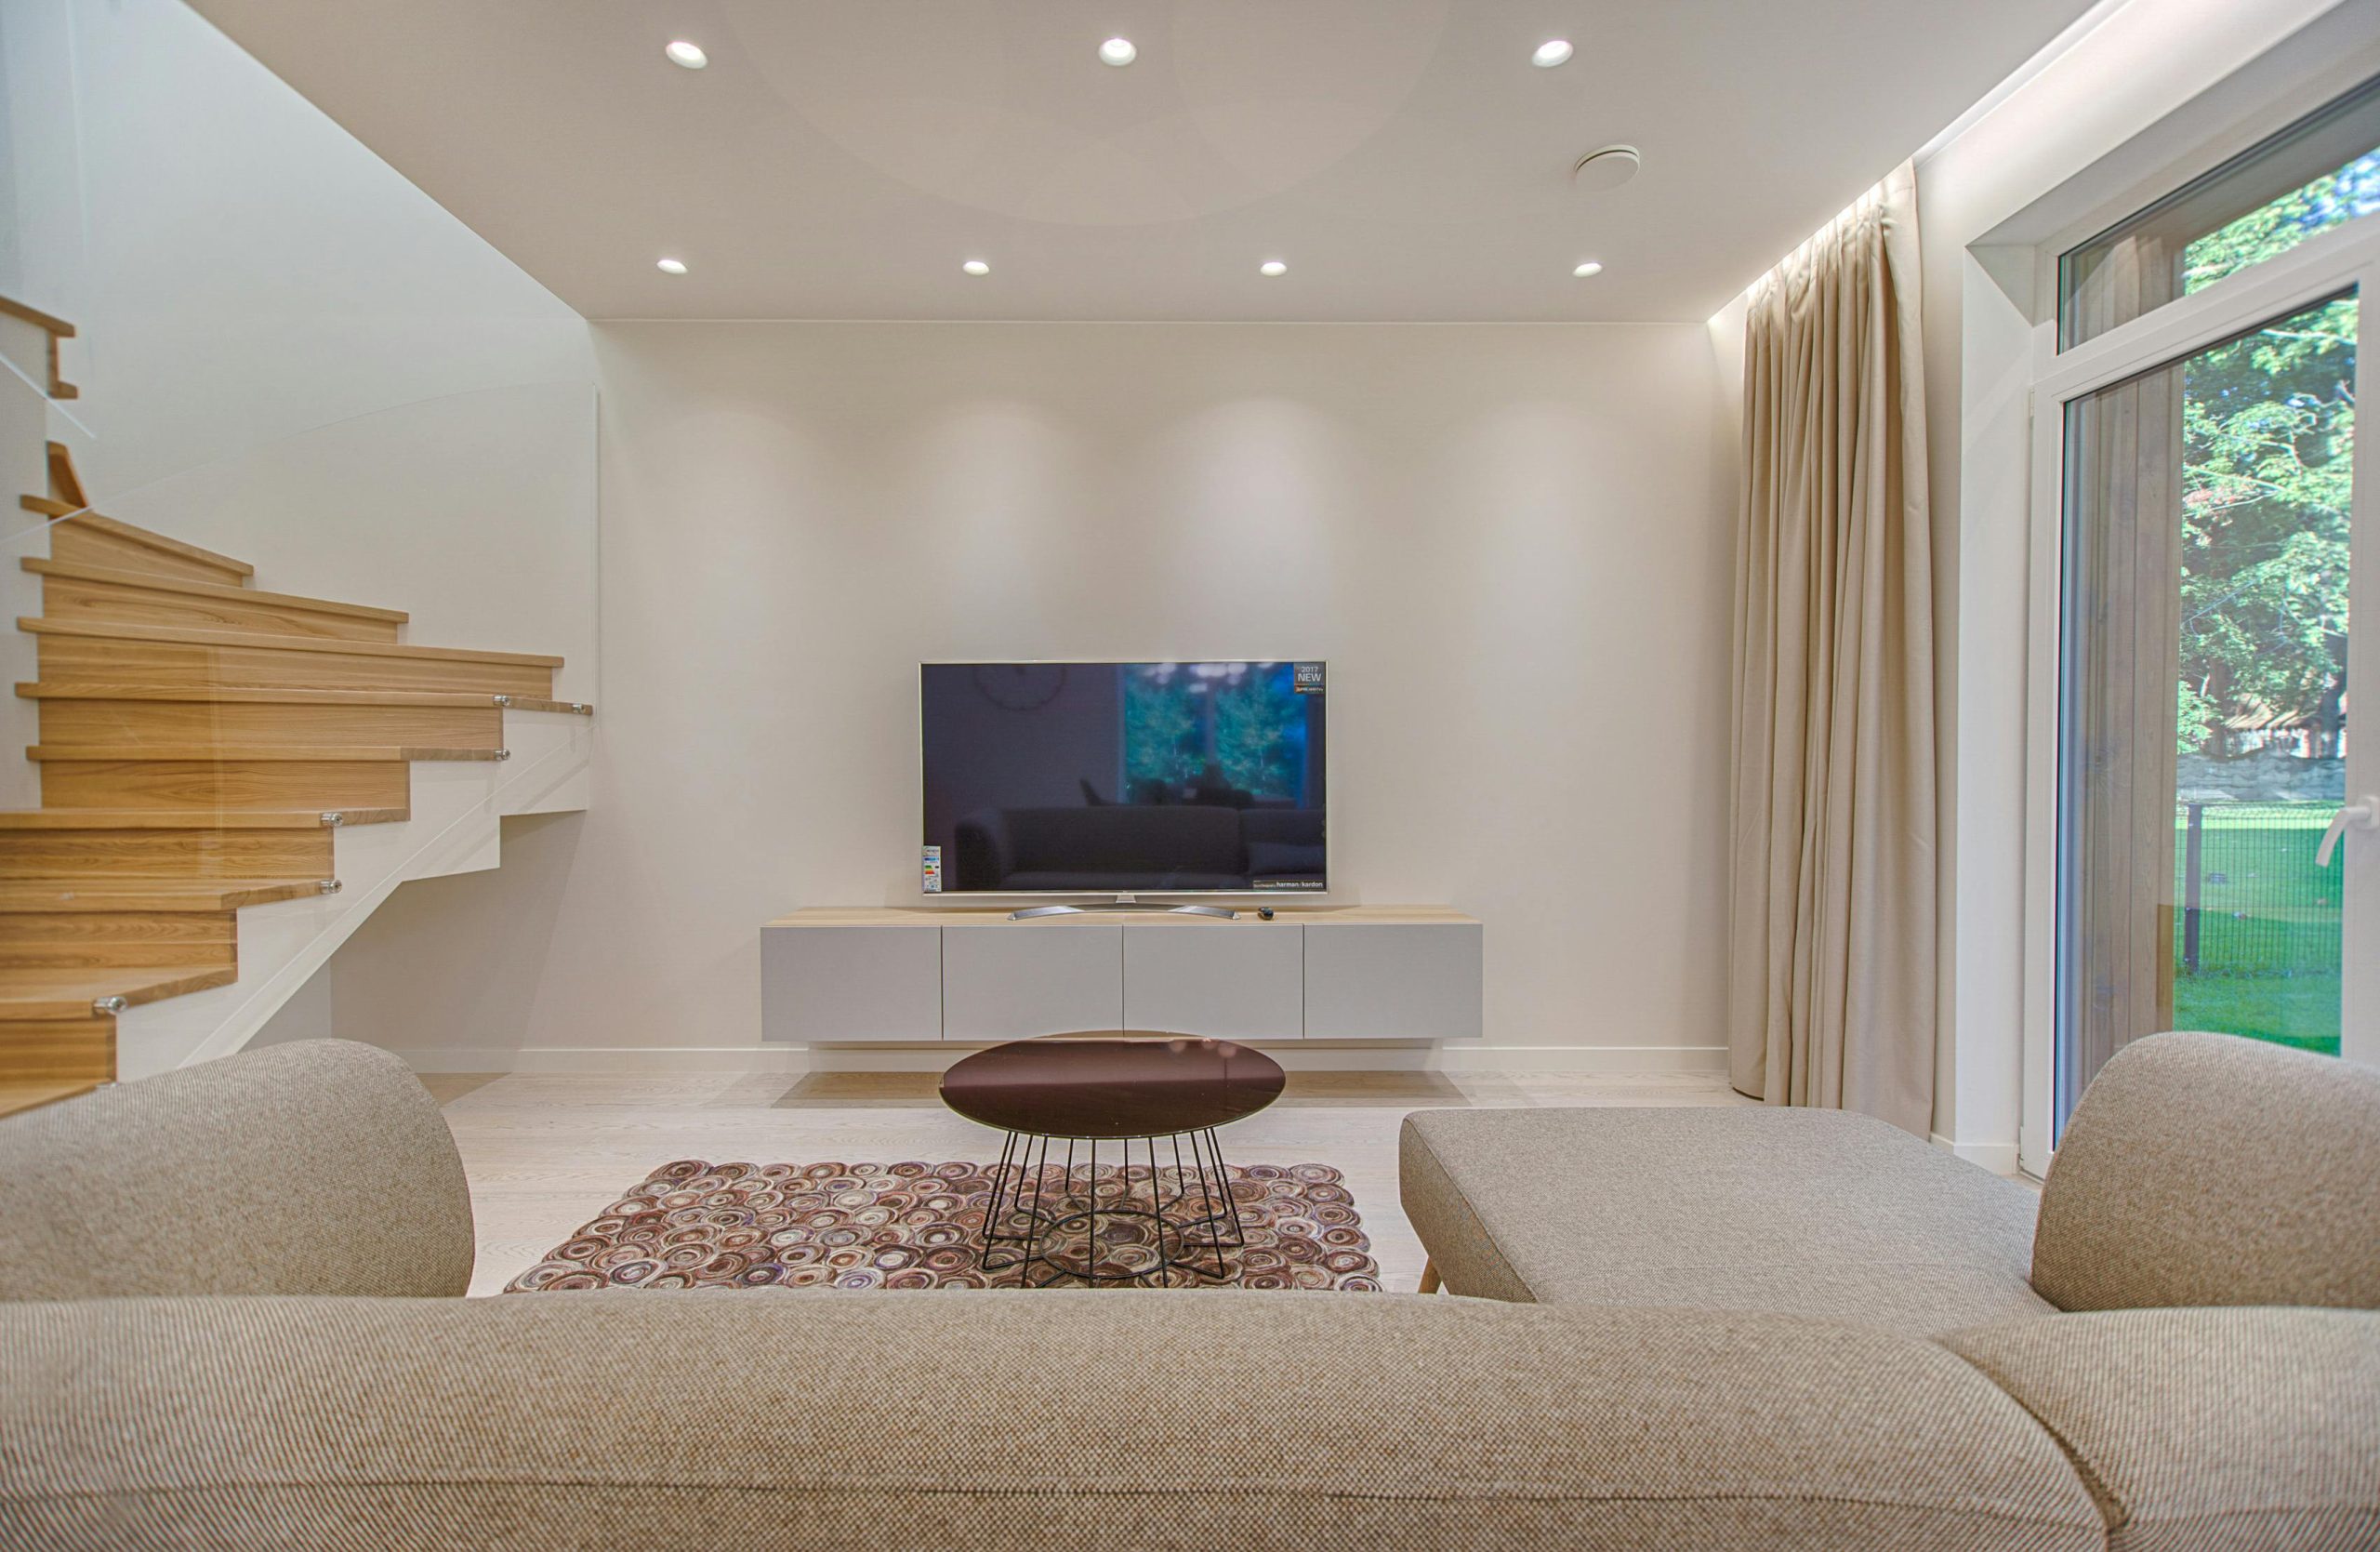 Understanding the Role of a TV in Living Room Layouts